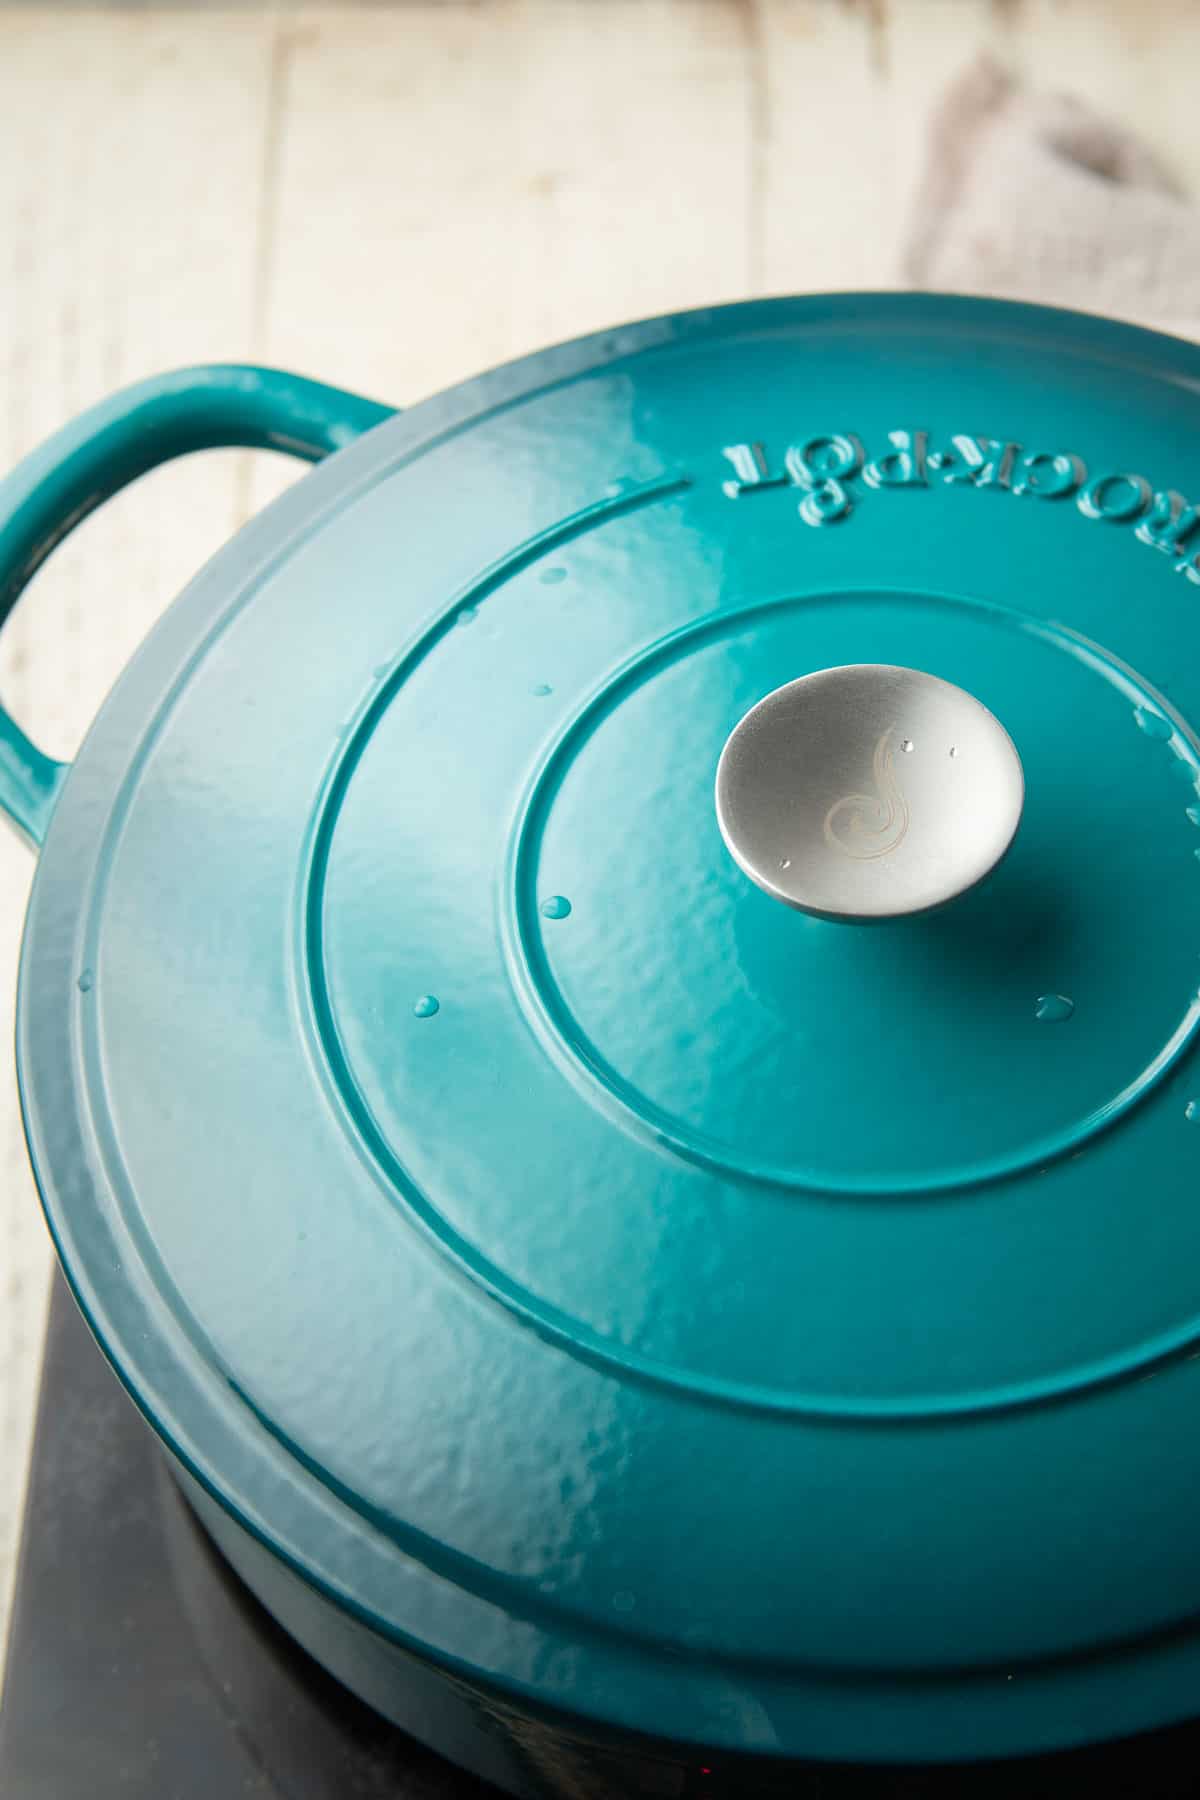 Blue pot with a lid on top sitting on a cooking surface.